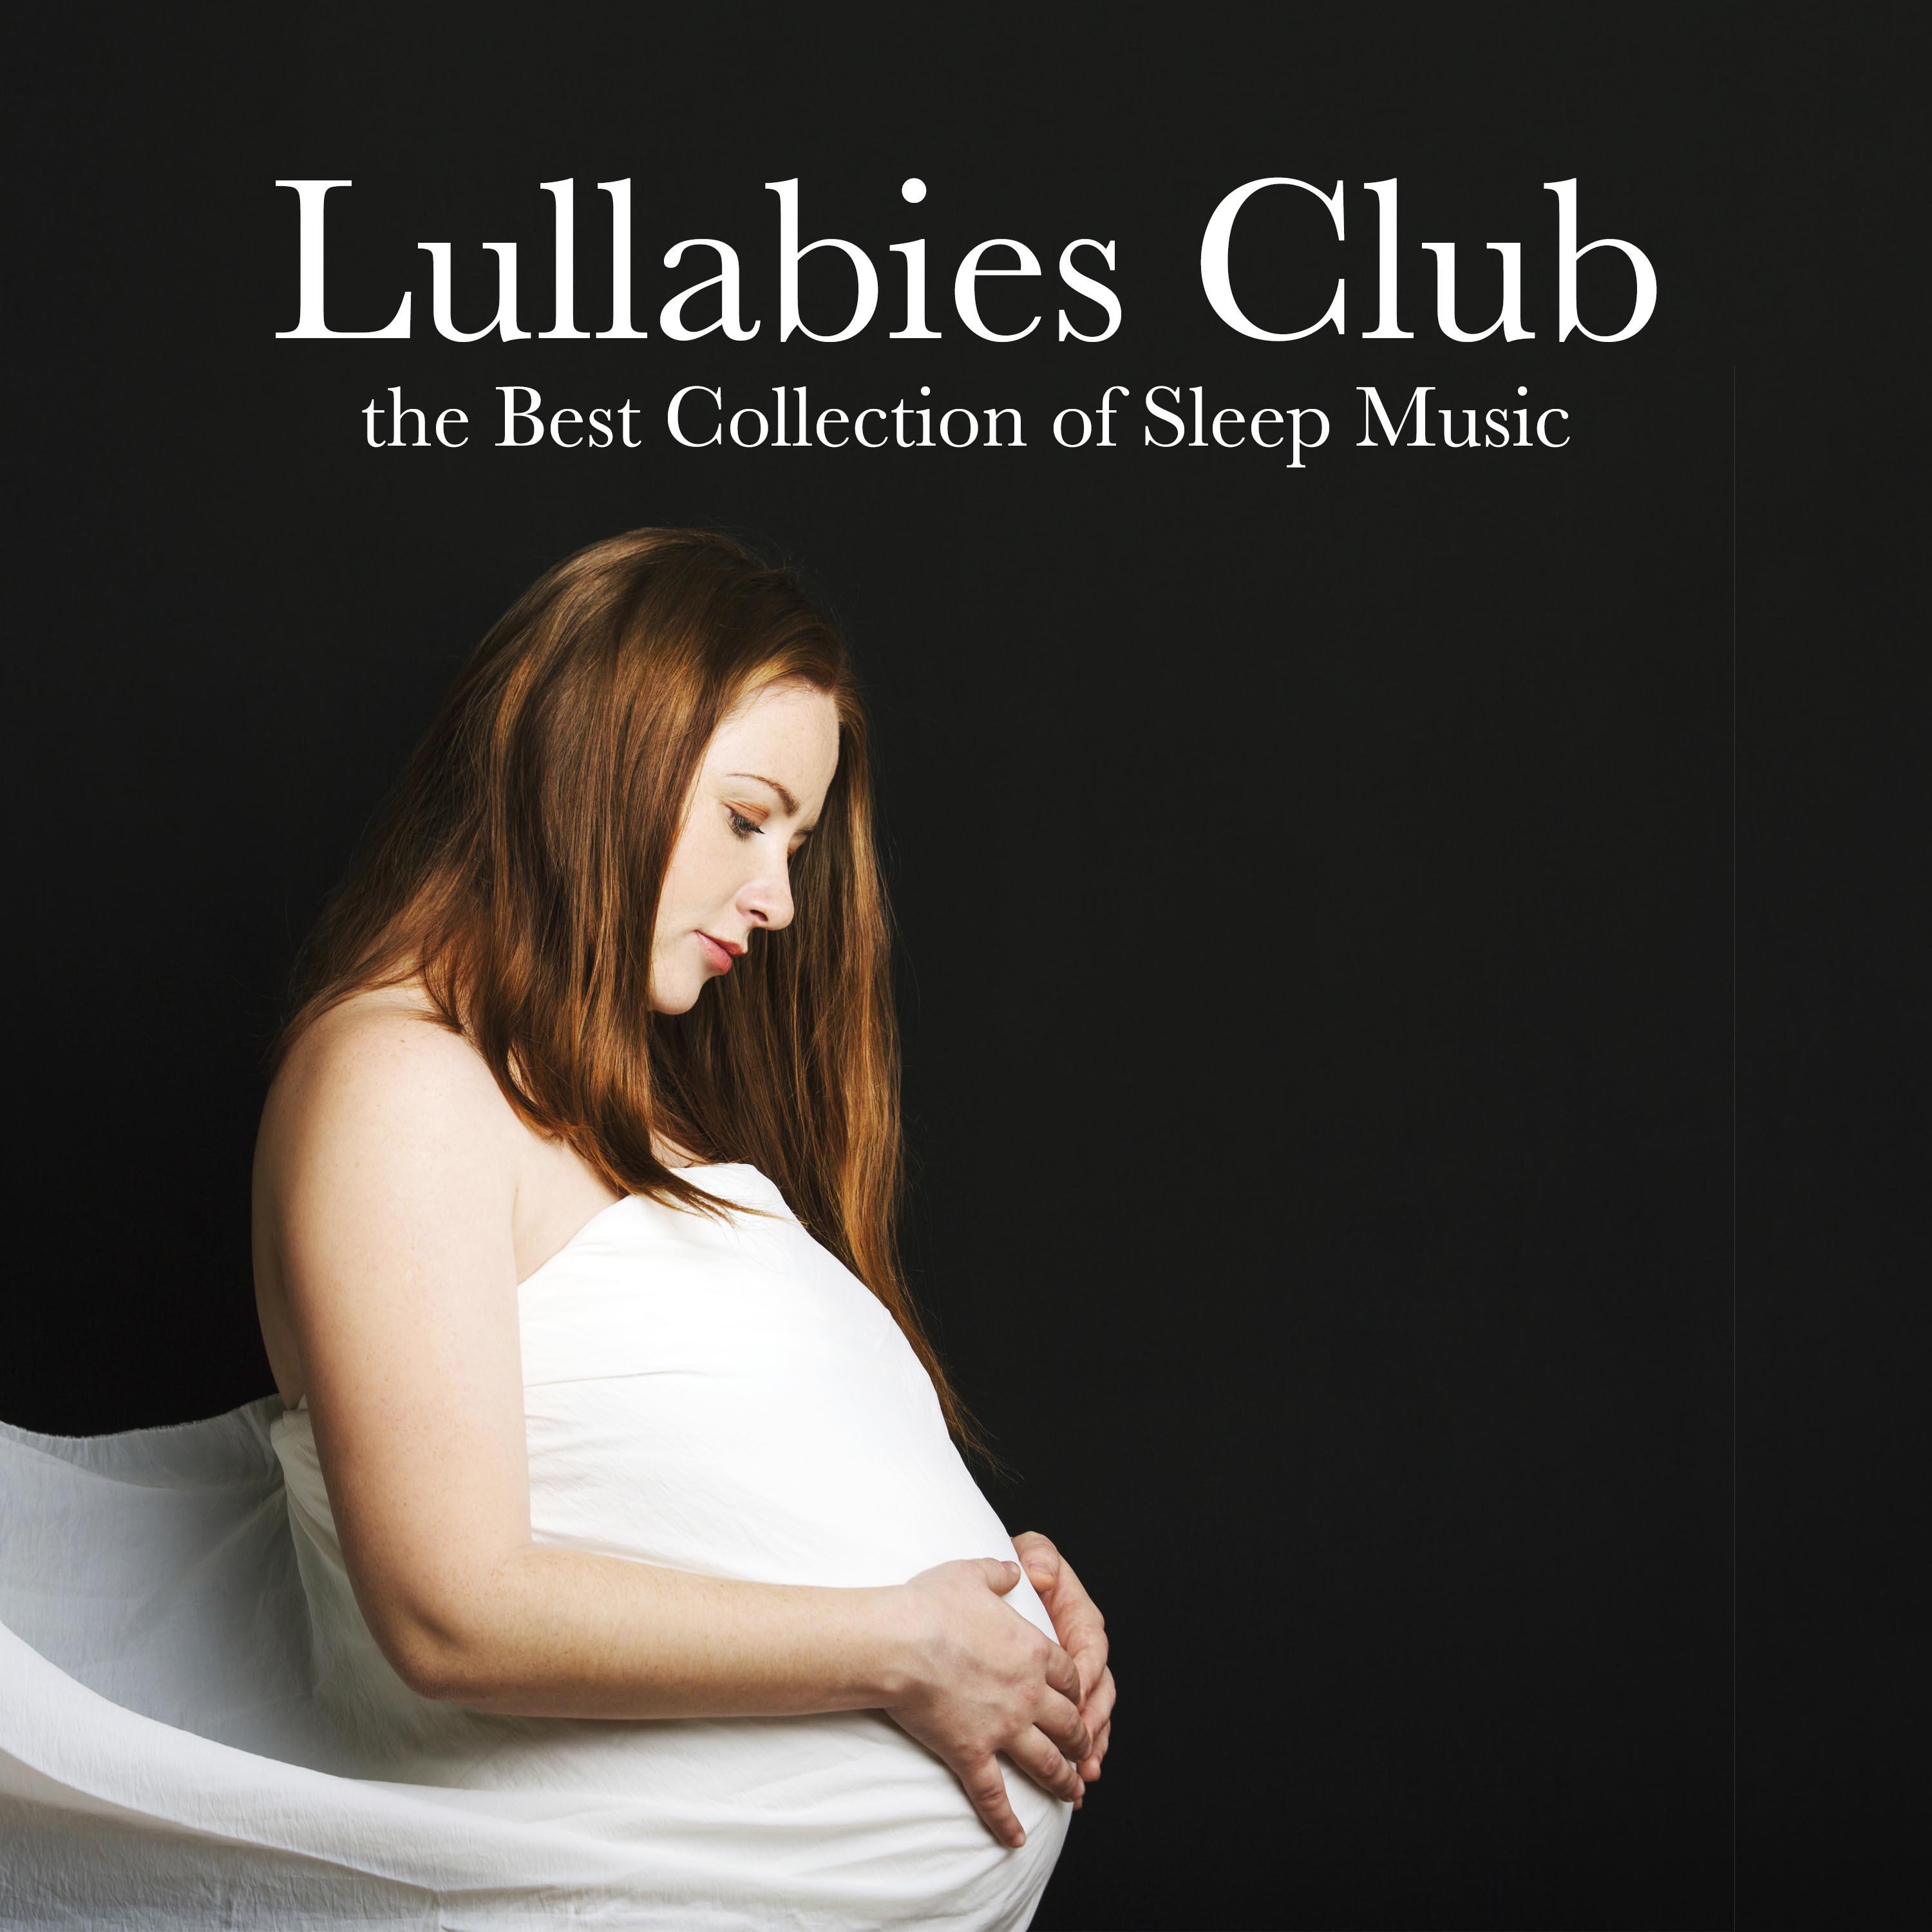 Lullabies Club - the Best Collection of Sleep Music for Newborns, Babies and Children